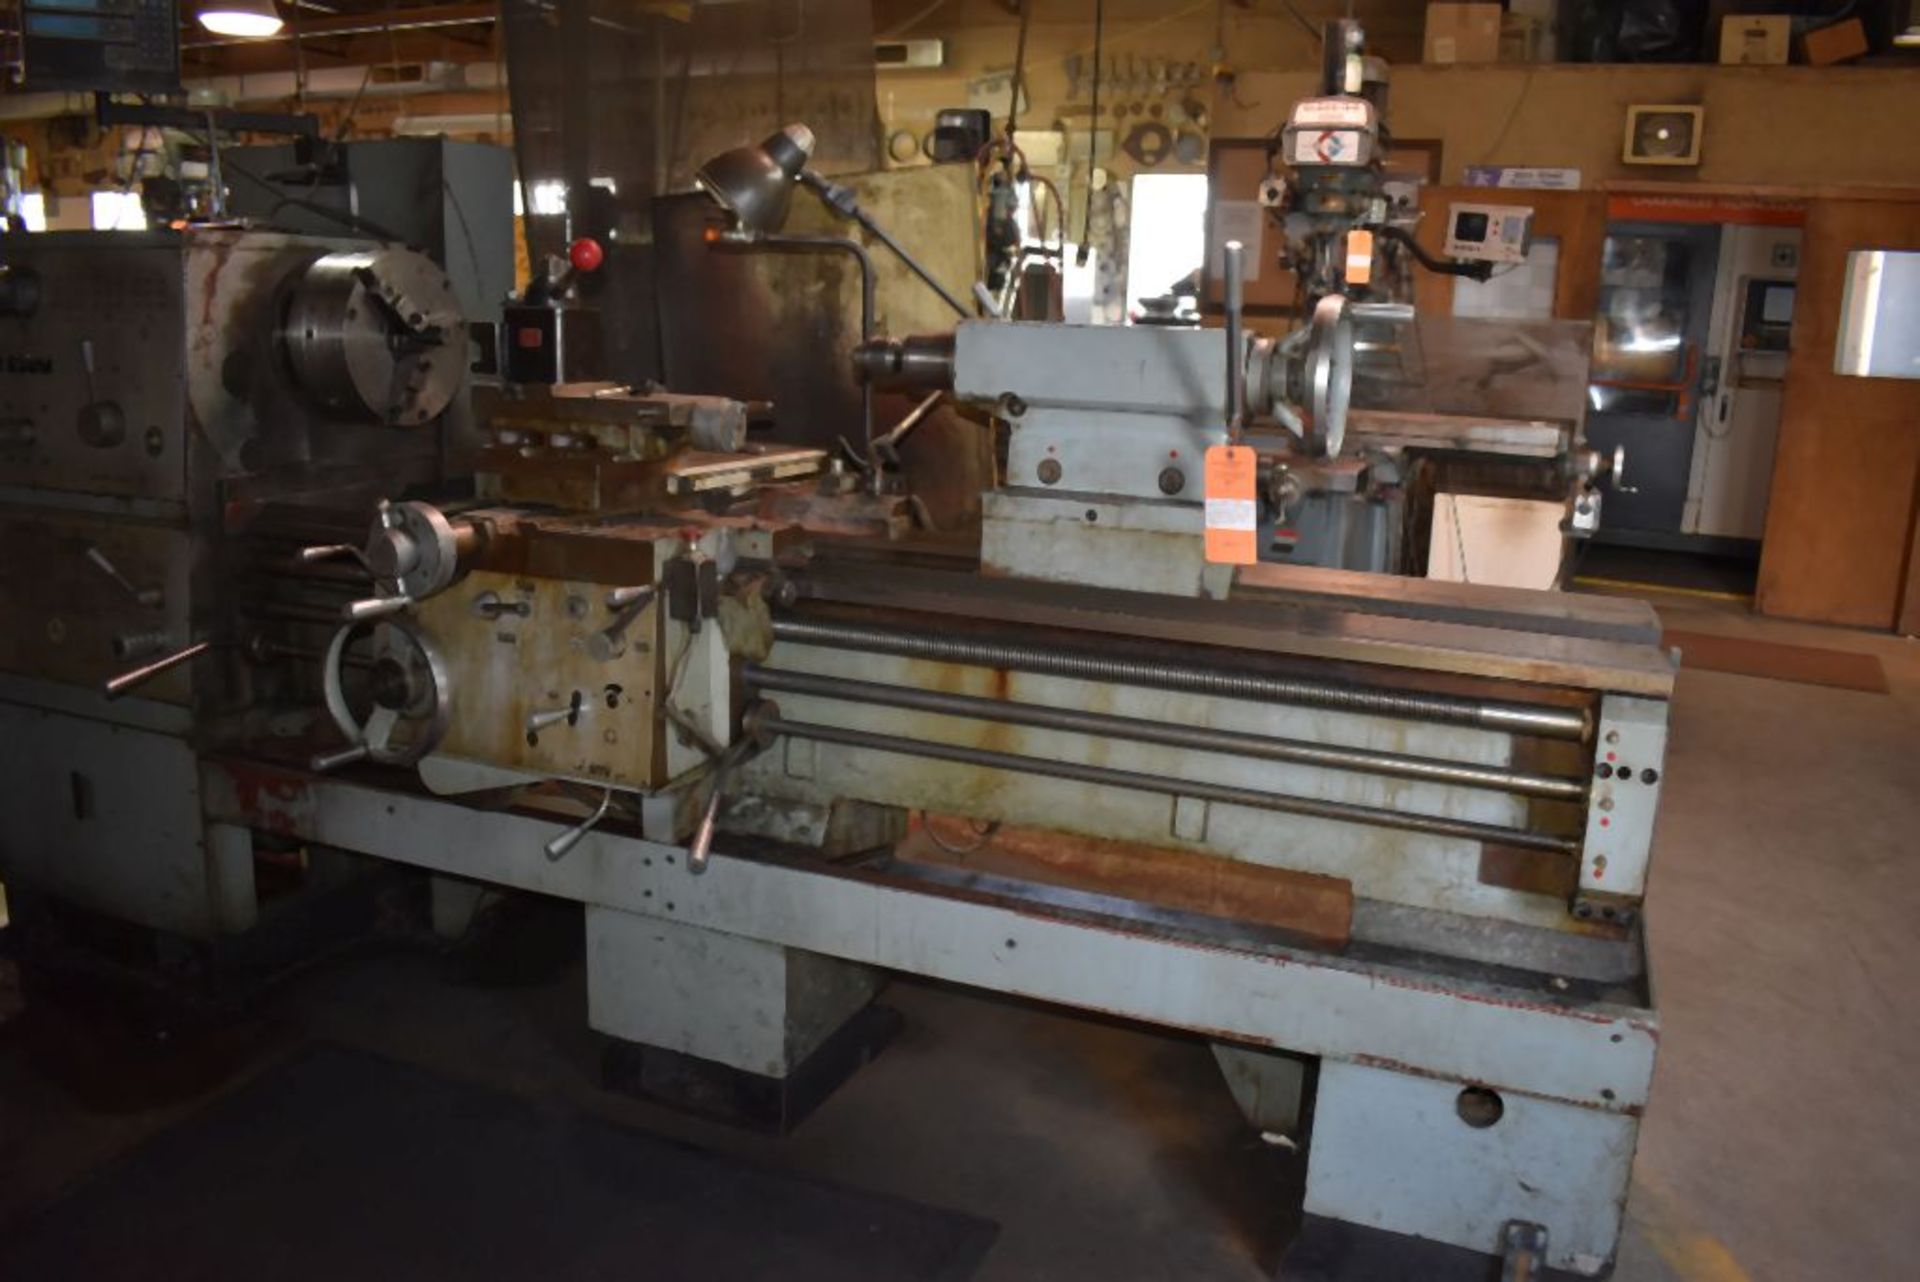 (1994) TOOLMEX (POLAND) ENGINE LATHE, MODEL TUR-630M, S/N: 50443, 12" 3-JAW CHUCK, 4" SPINDLE BORE